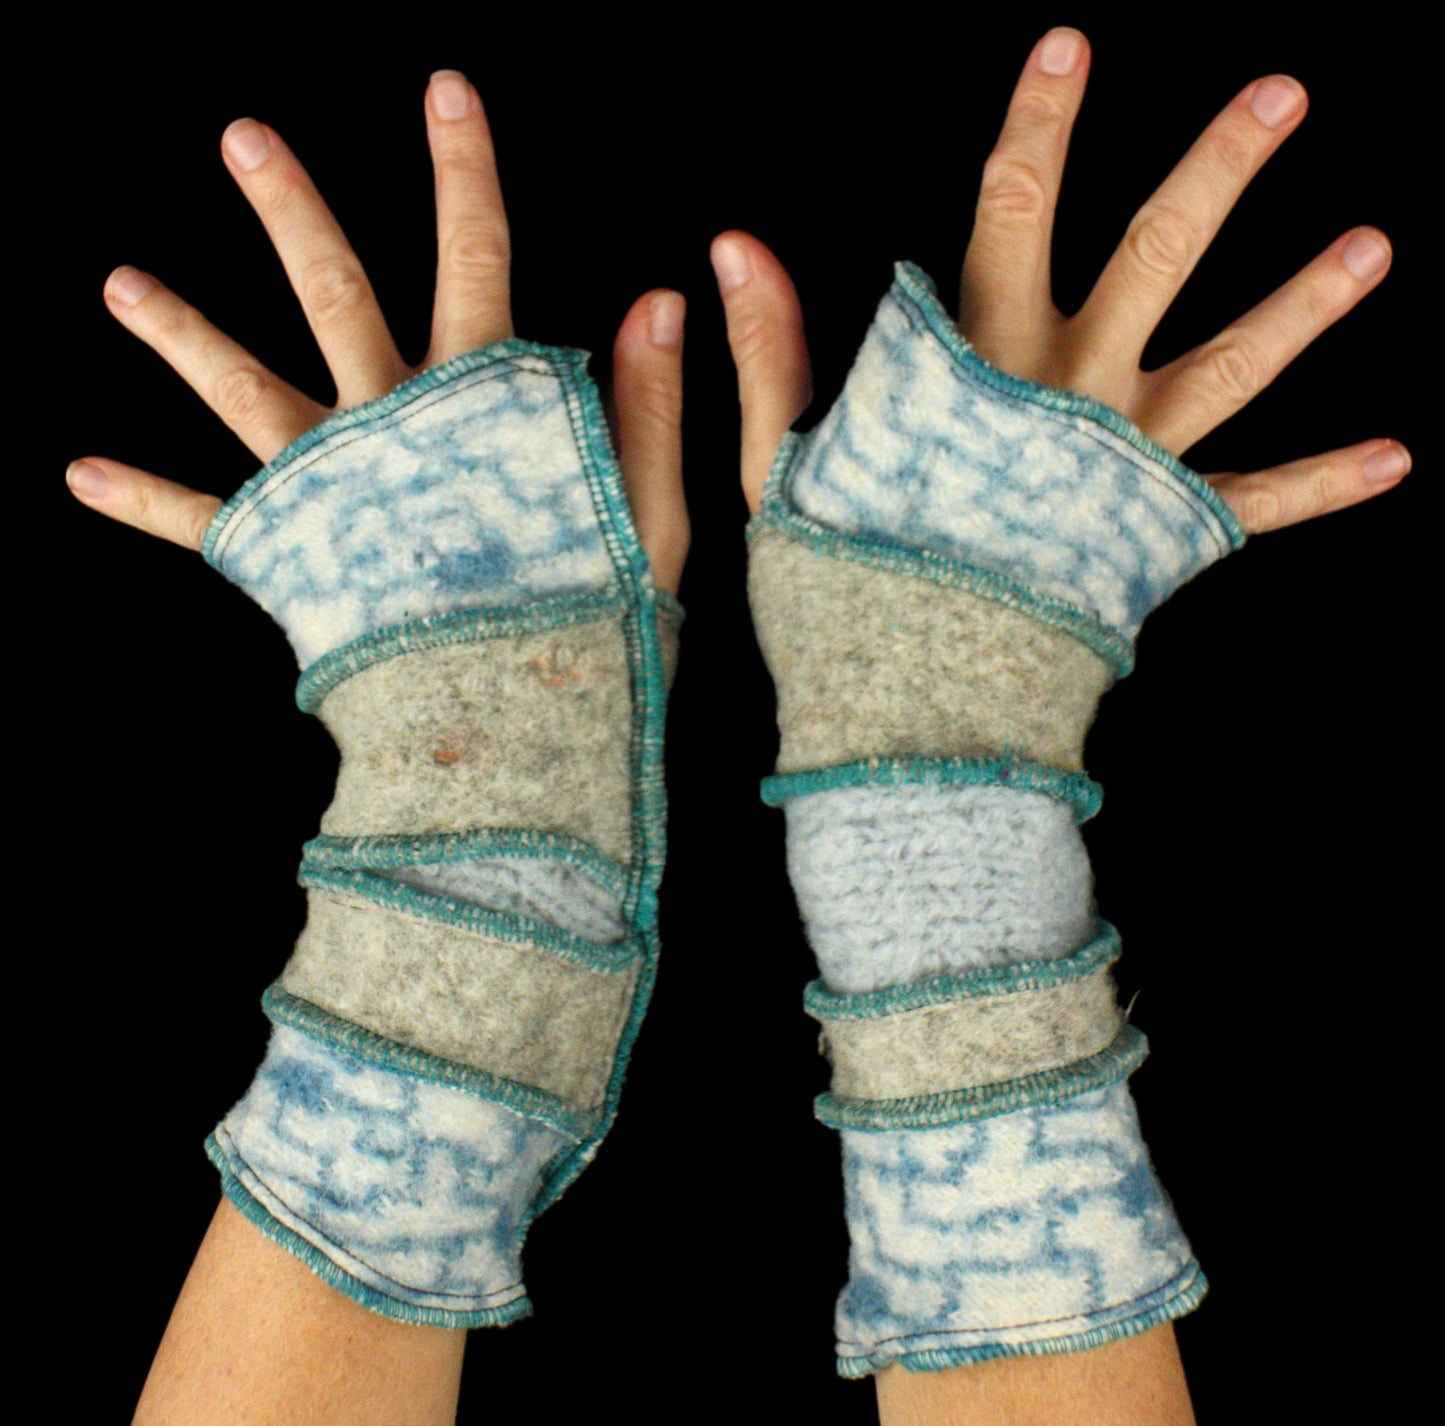 Arm Warmers - LARGE - made from upcycled sweaters